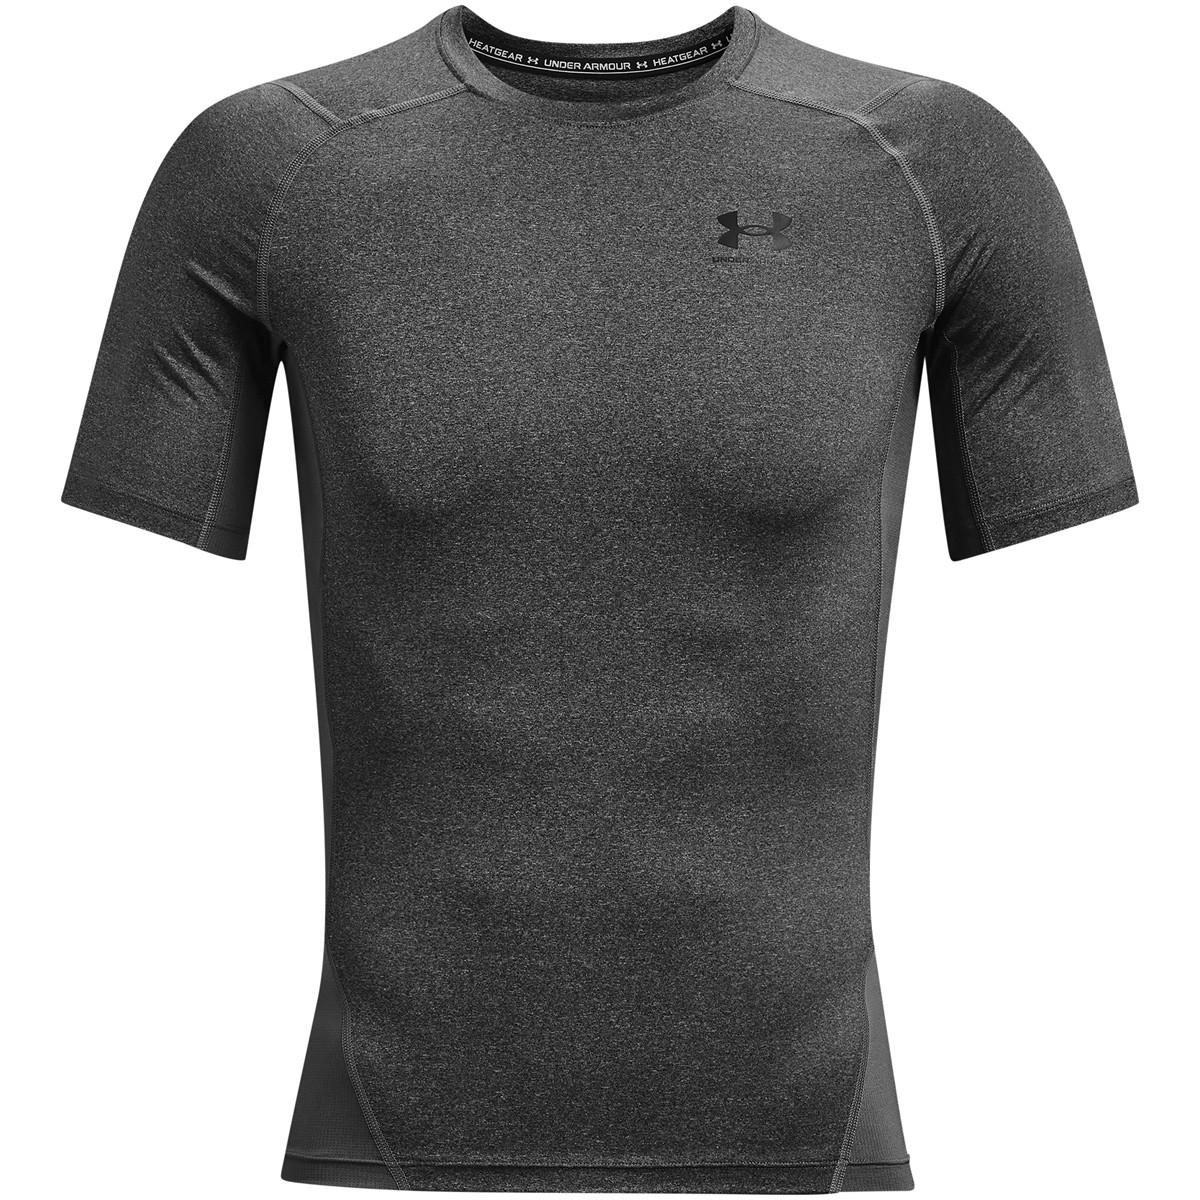 Under Armour, Shirts, Under Armour Compression Tank Top